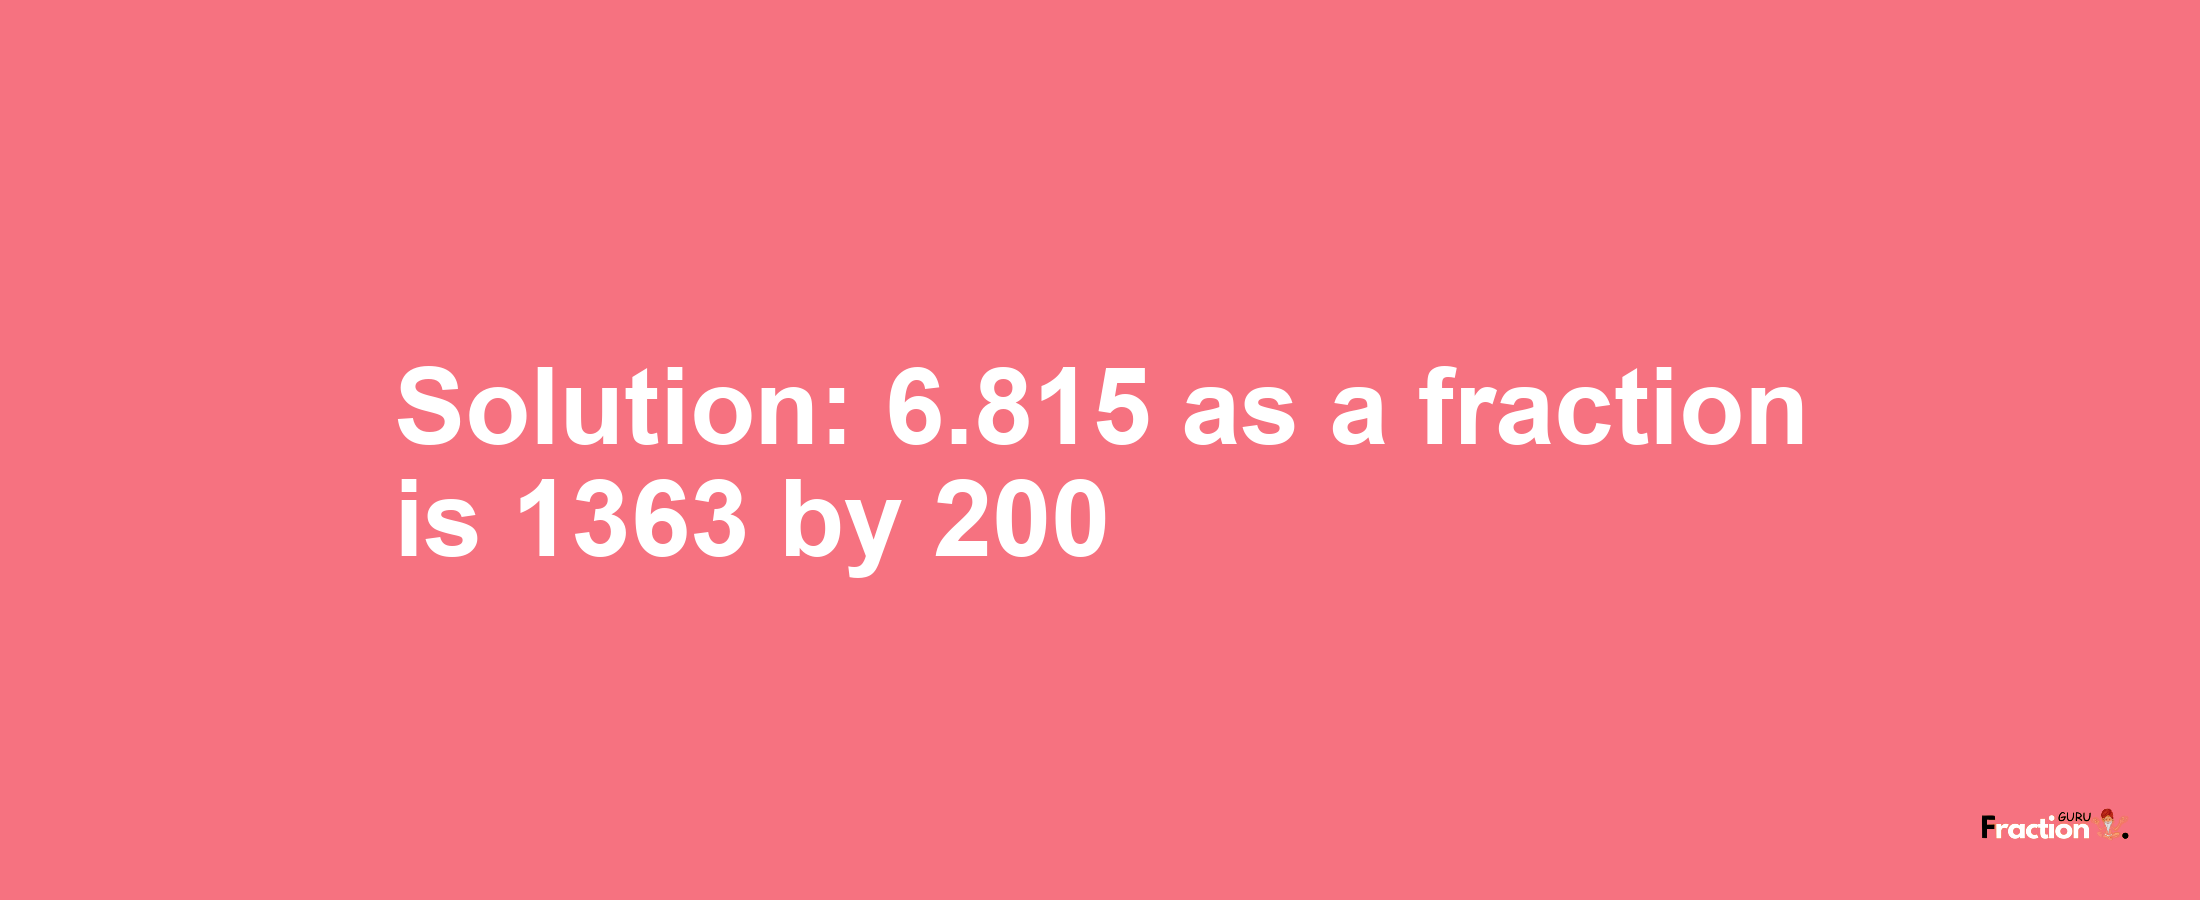 Solution:6.815 as a fraction is 1363/200